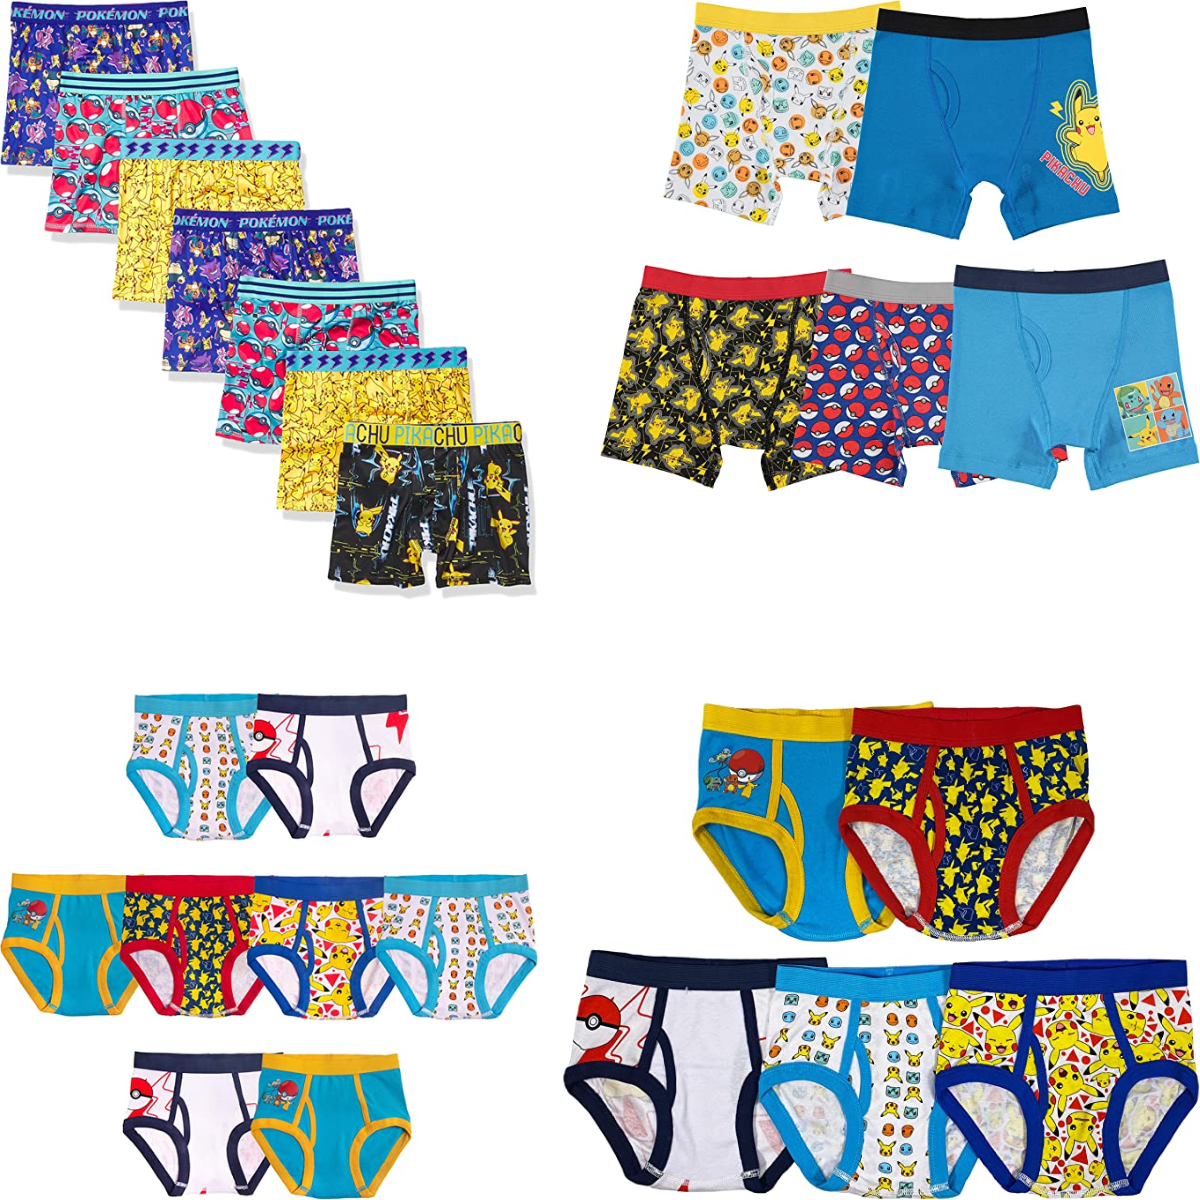 Pokemon Boys' Underwear Multipacks for up to 45% Off | Smart Savers